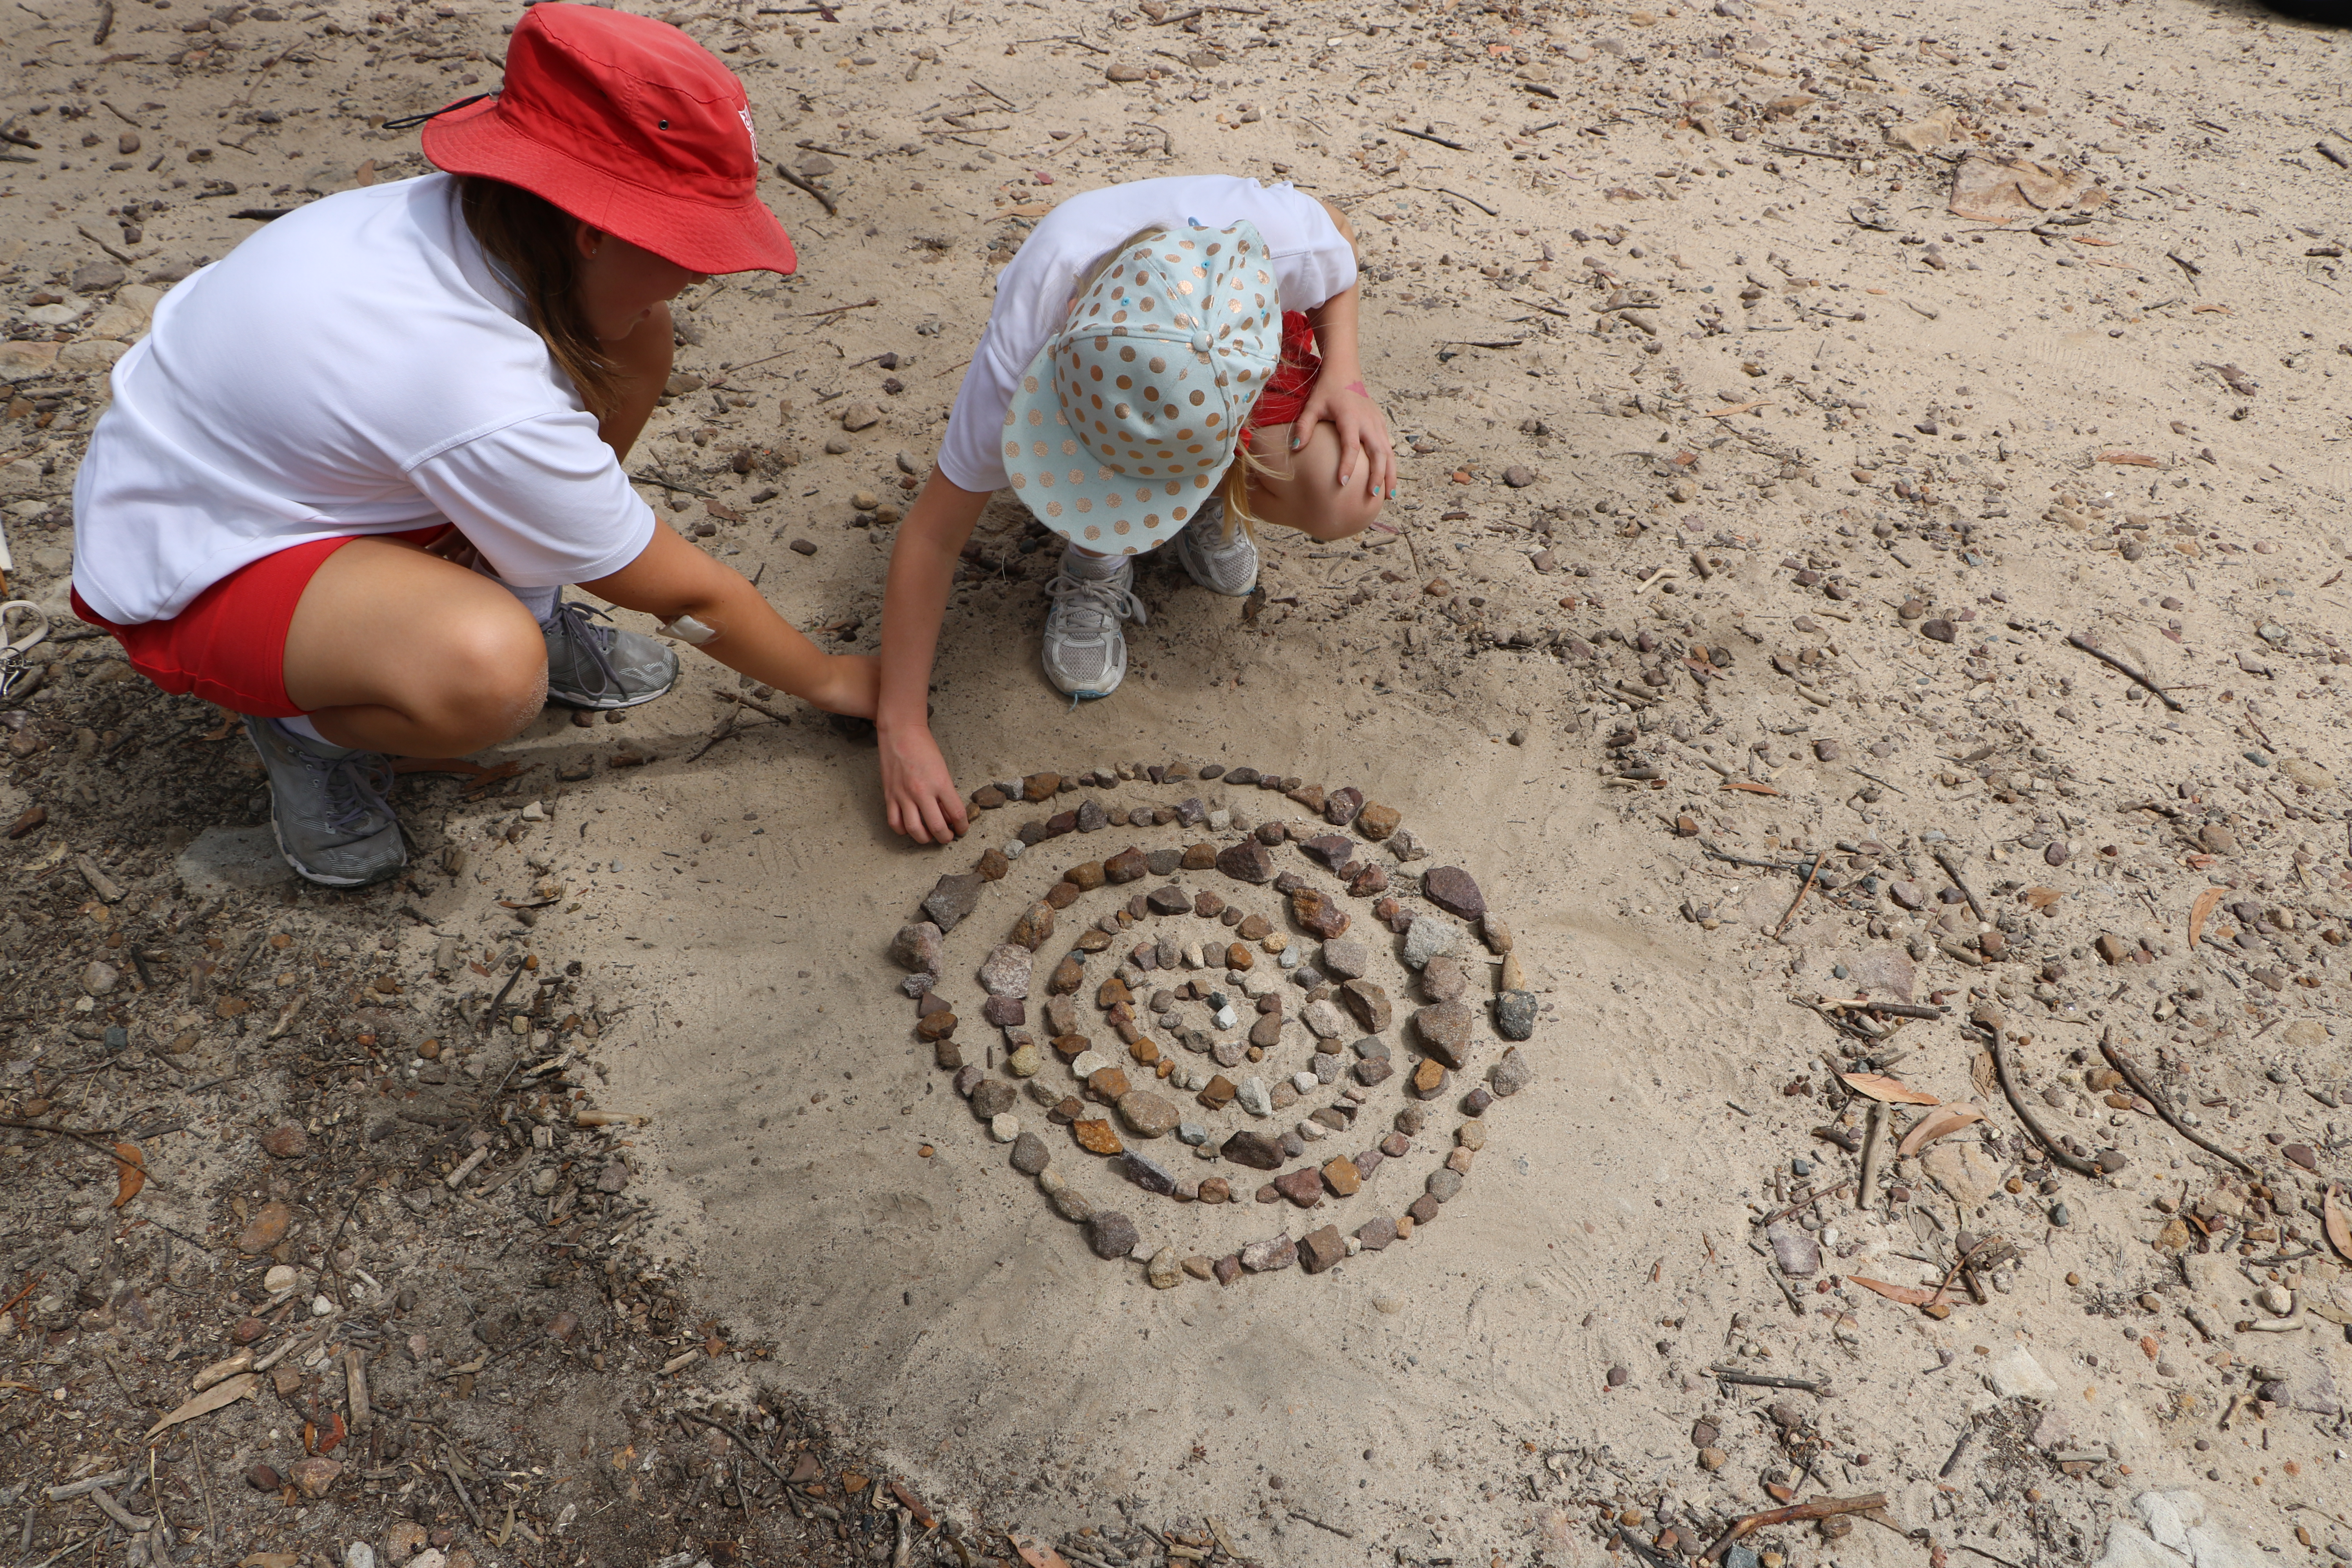 2 young students kneeling down in sand creating a spiral mandala with pebbles, rocks and twigs